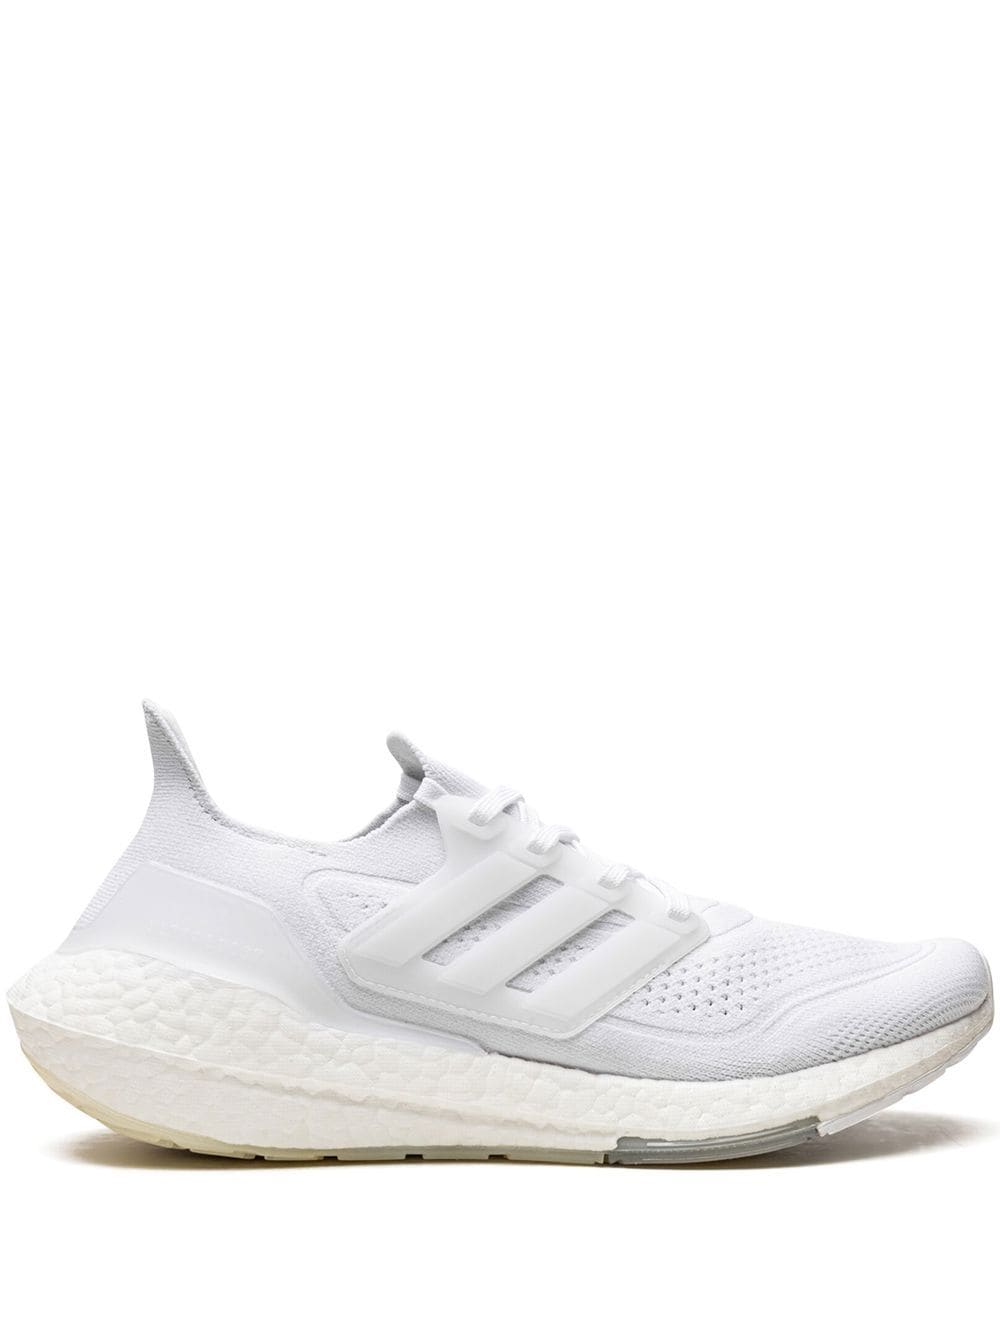 adidas Ultraboost 21 low-top sneakers - White von adidas